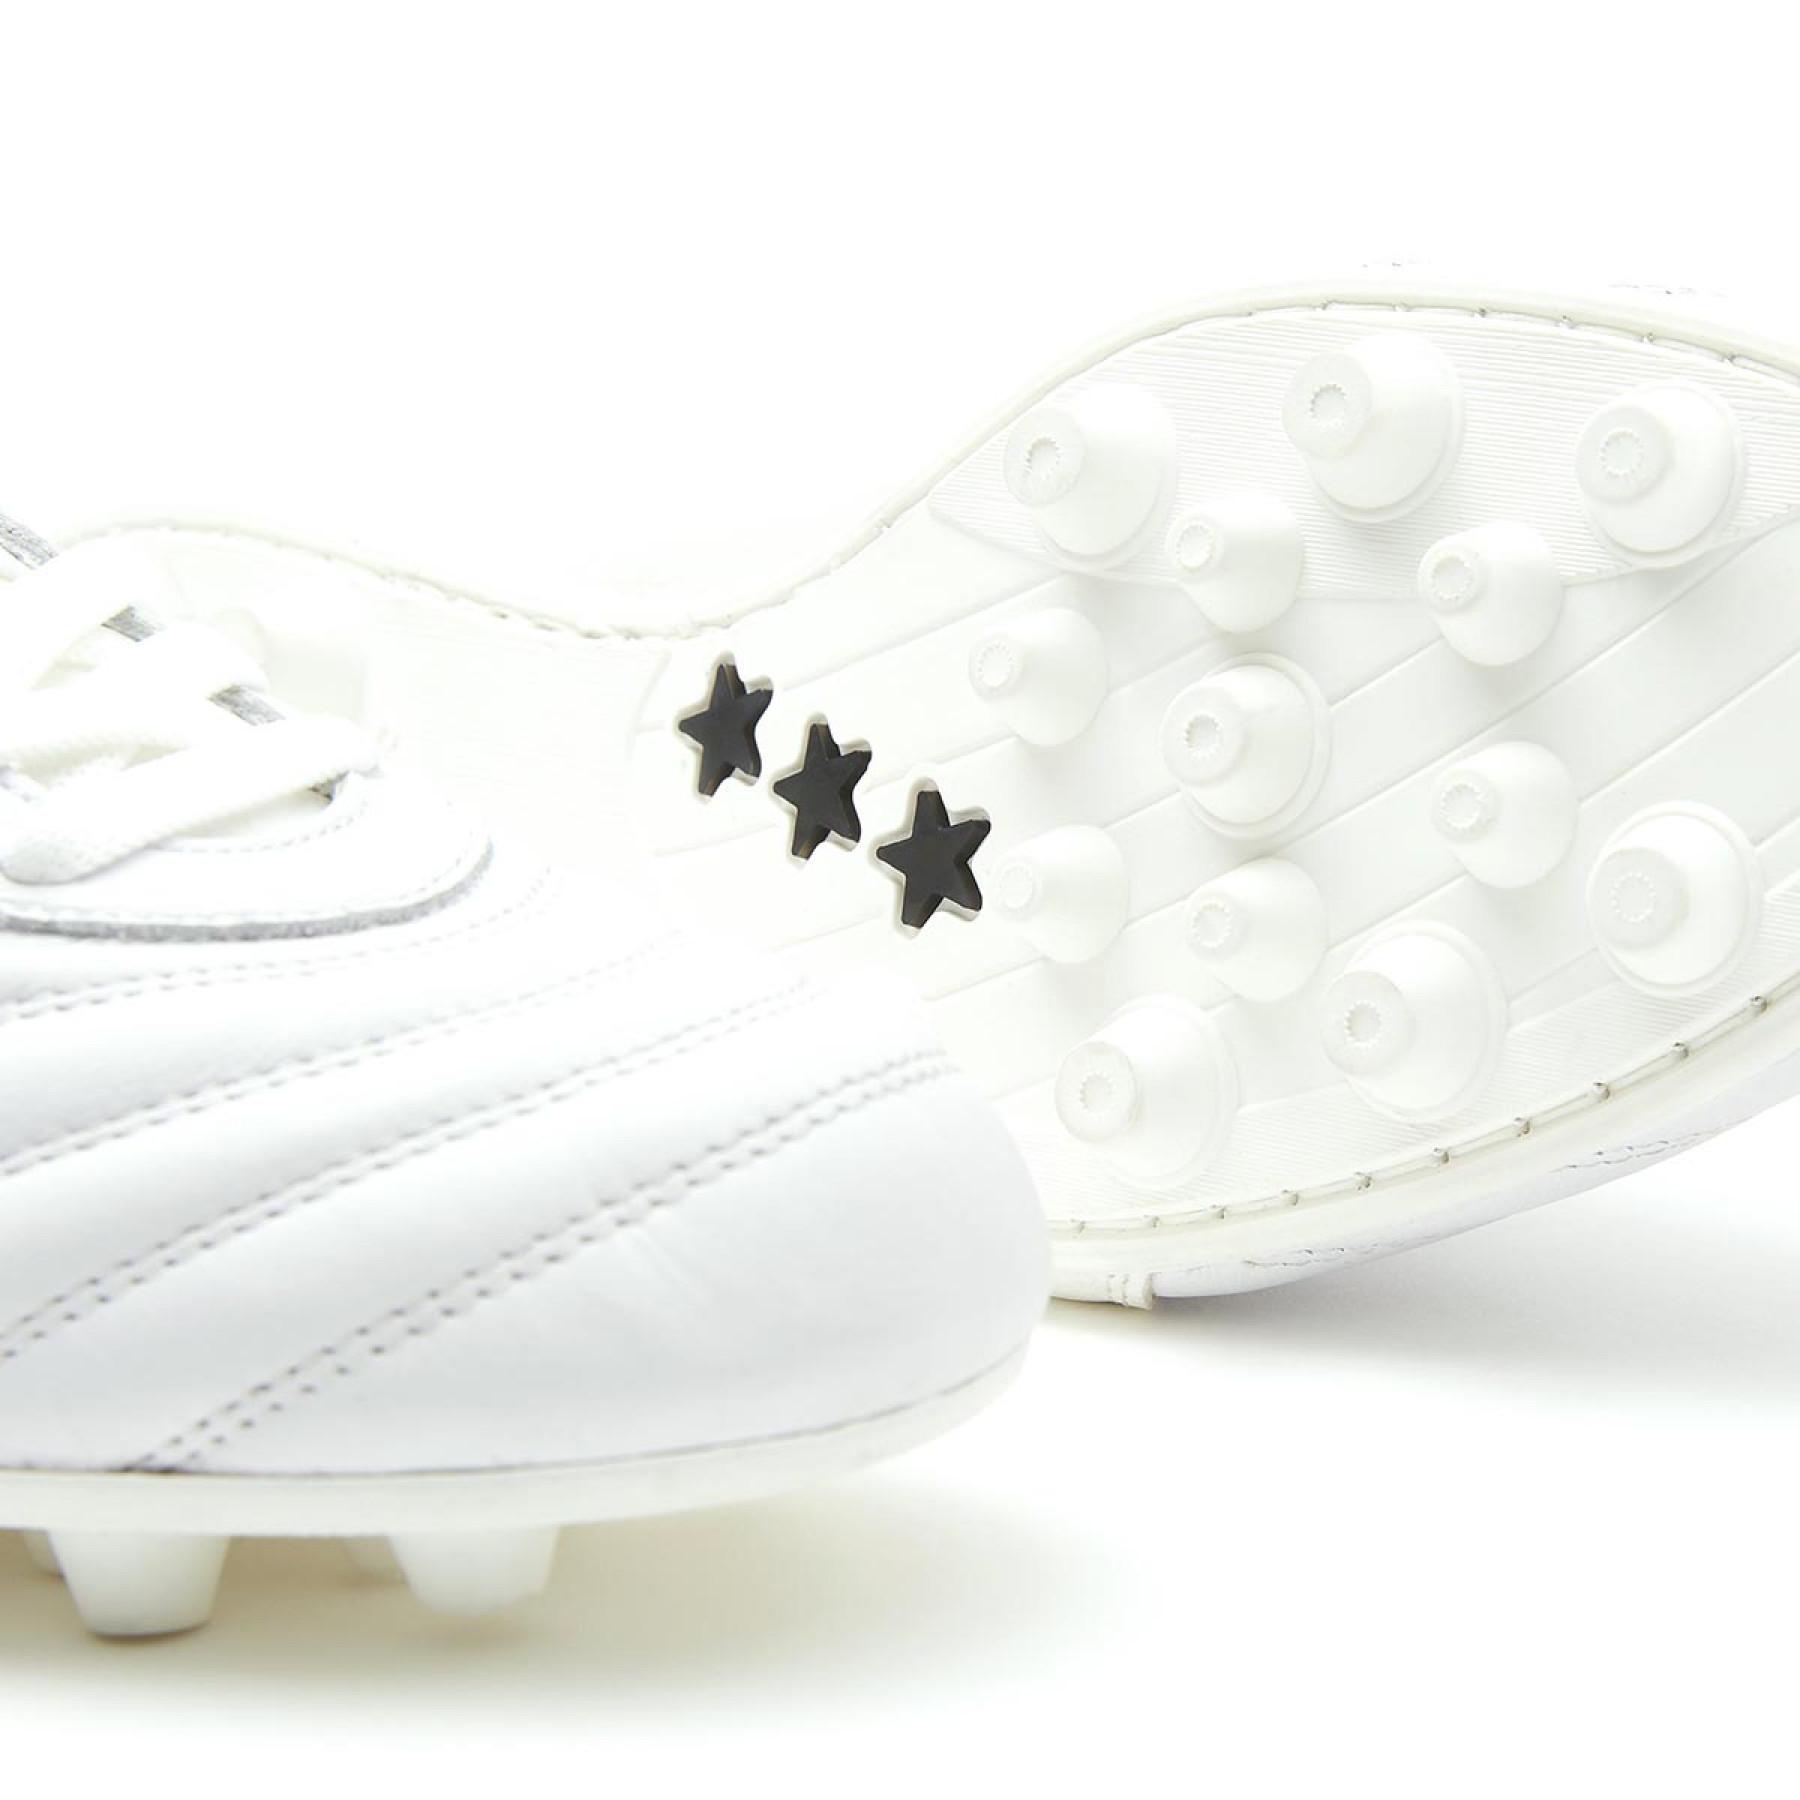 Chaussures de Football Pantofola D'Oro Derby Leather/Tech